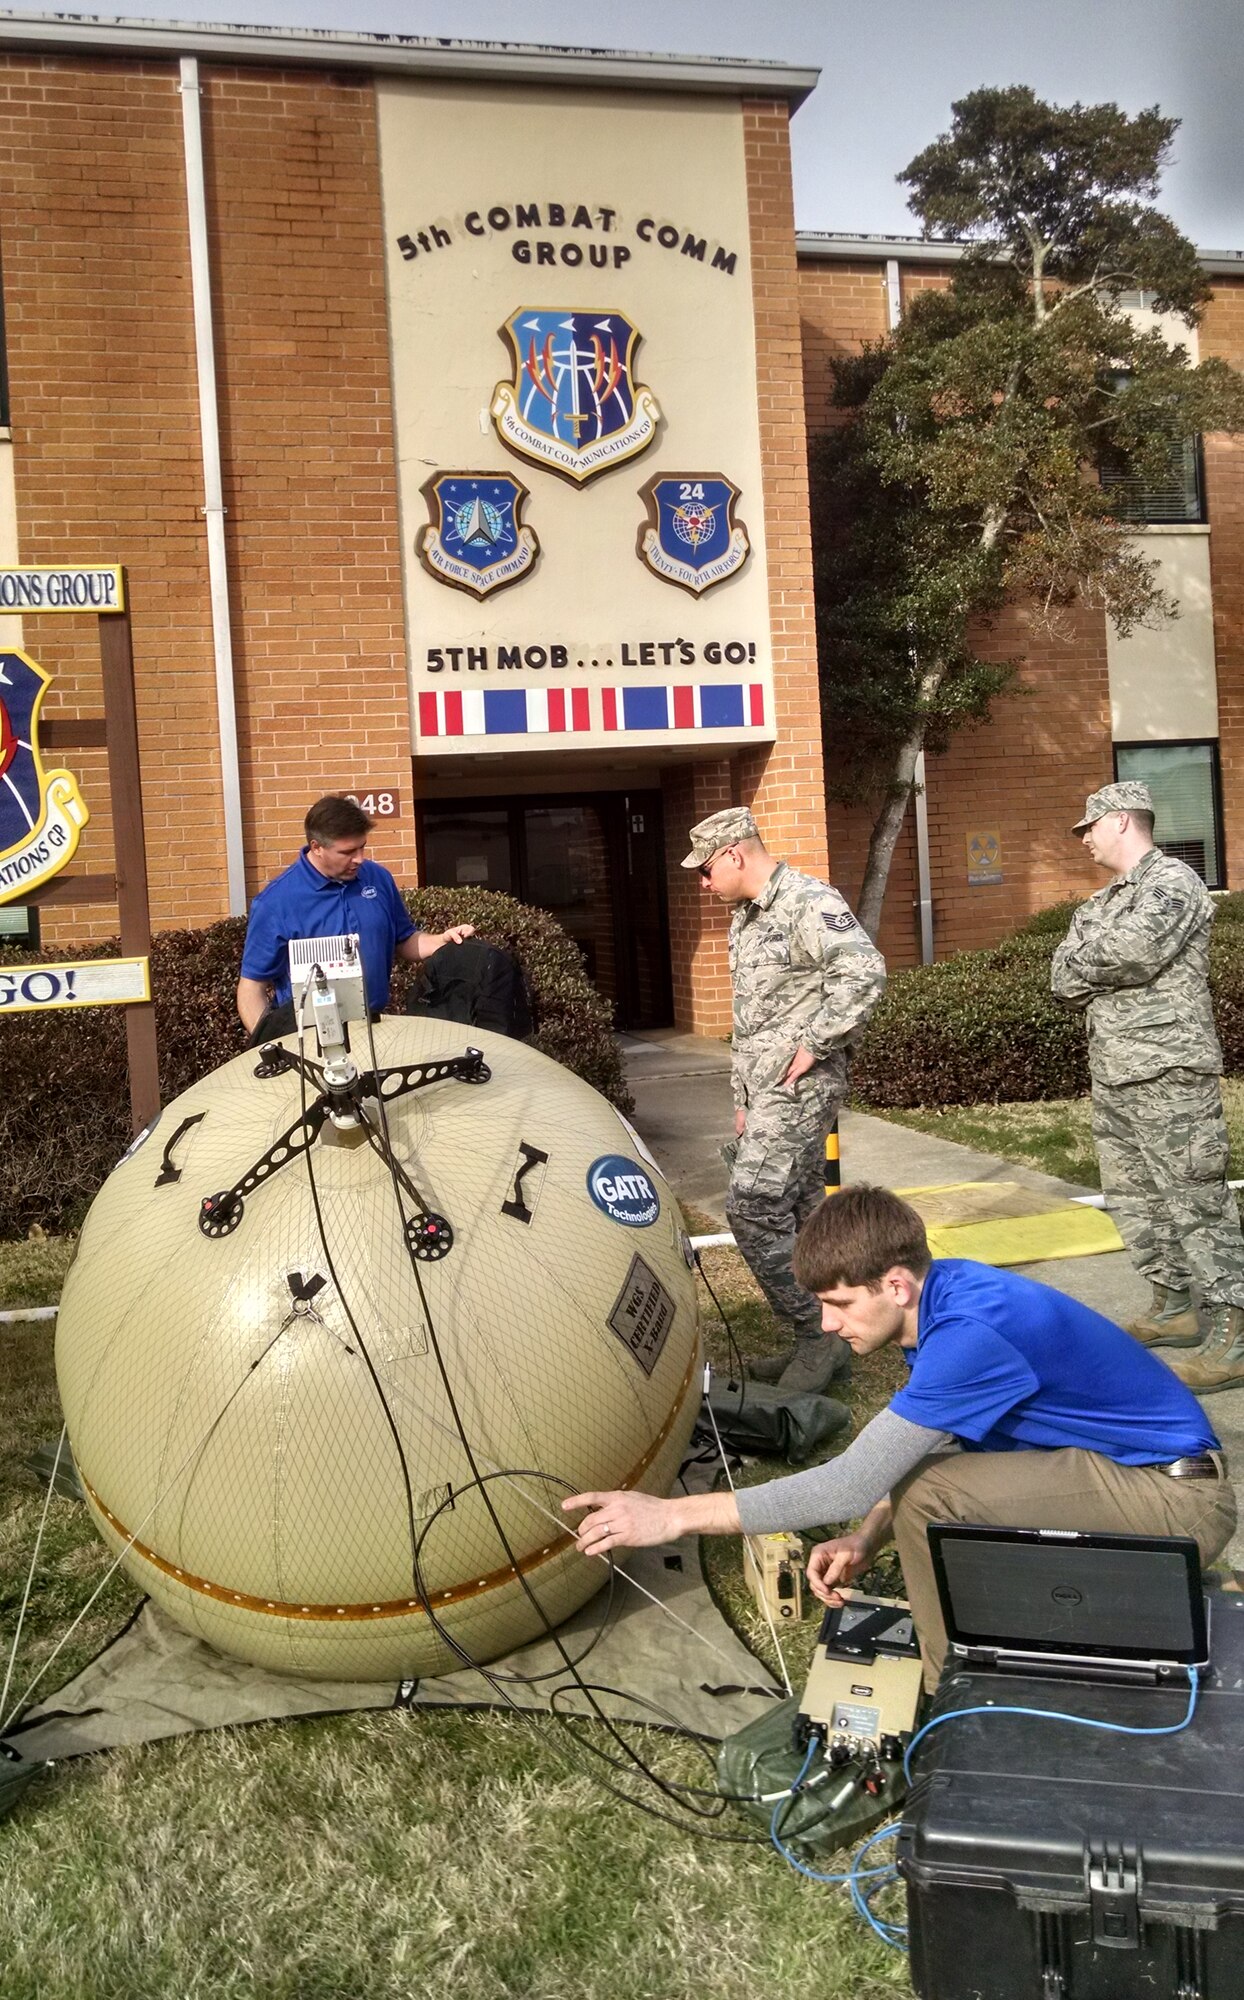 Representatives demonstrate A GATR inflatable satellite communications antenna terminal to members from the 5th Combat Communications Group at Robins Air Force Base, Georgia. (Air Force photo)